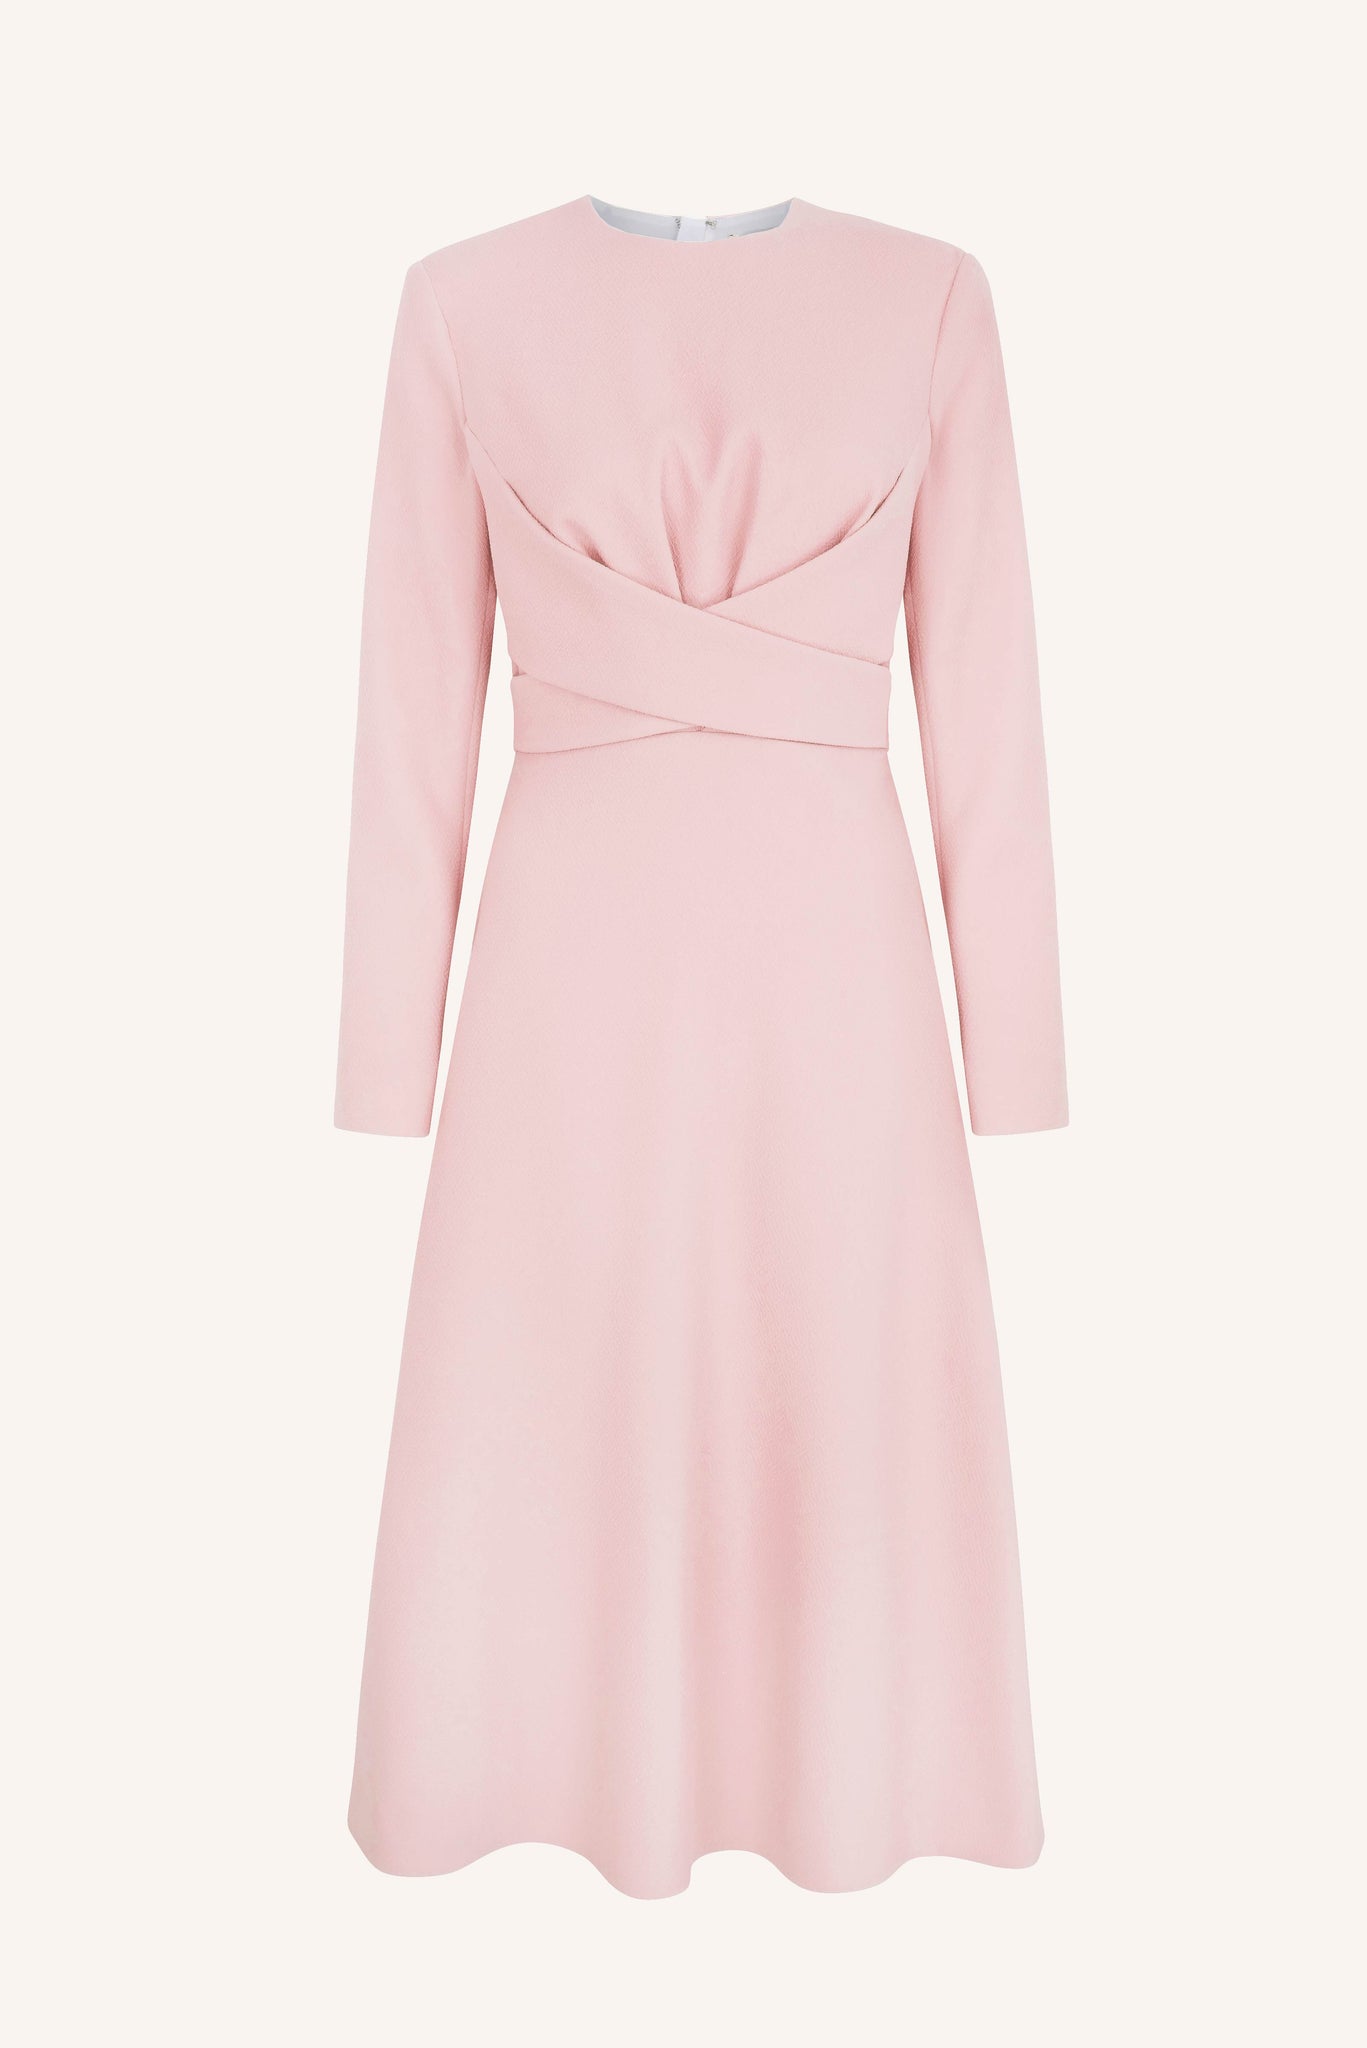 Elta Dress | Peony Wrap Front Long Sleeve Fit-and-Flare Dress | Emilia Wickstead